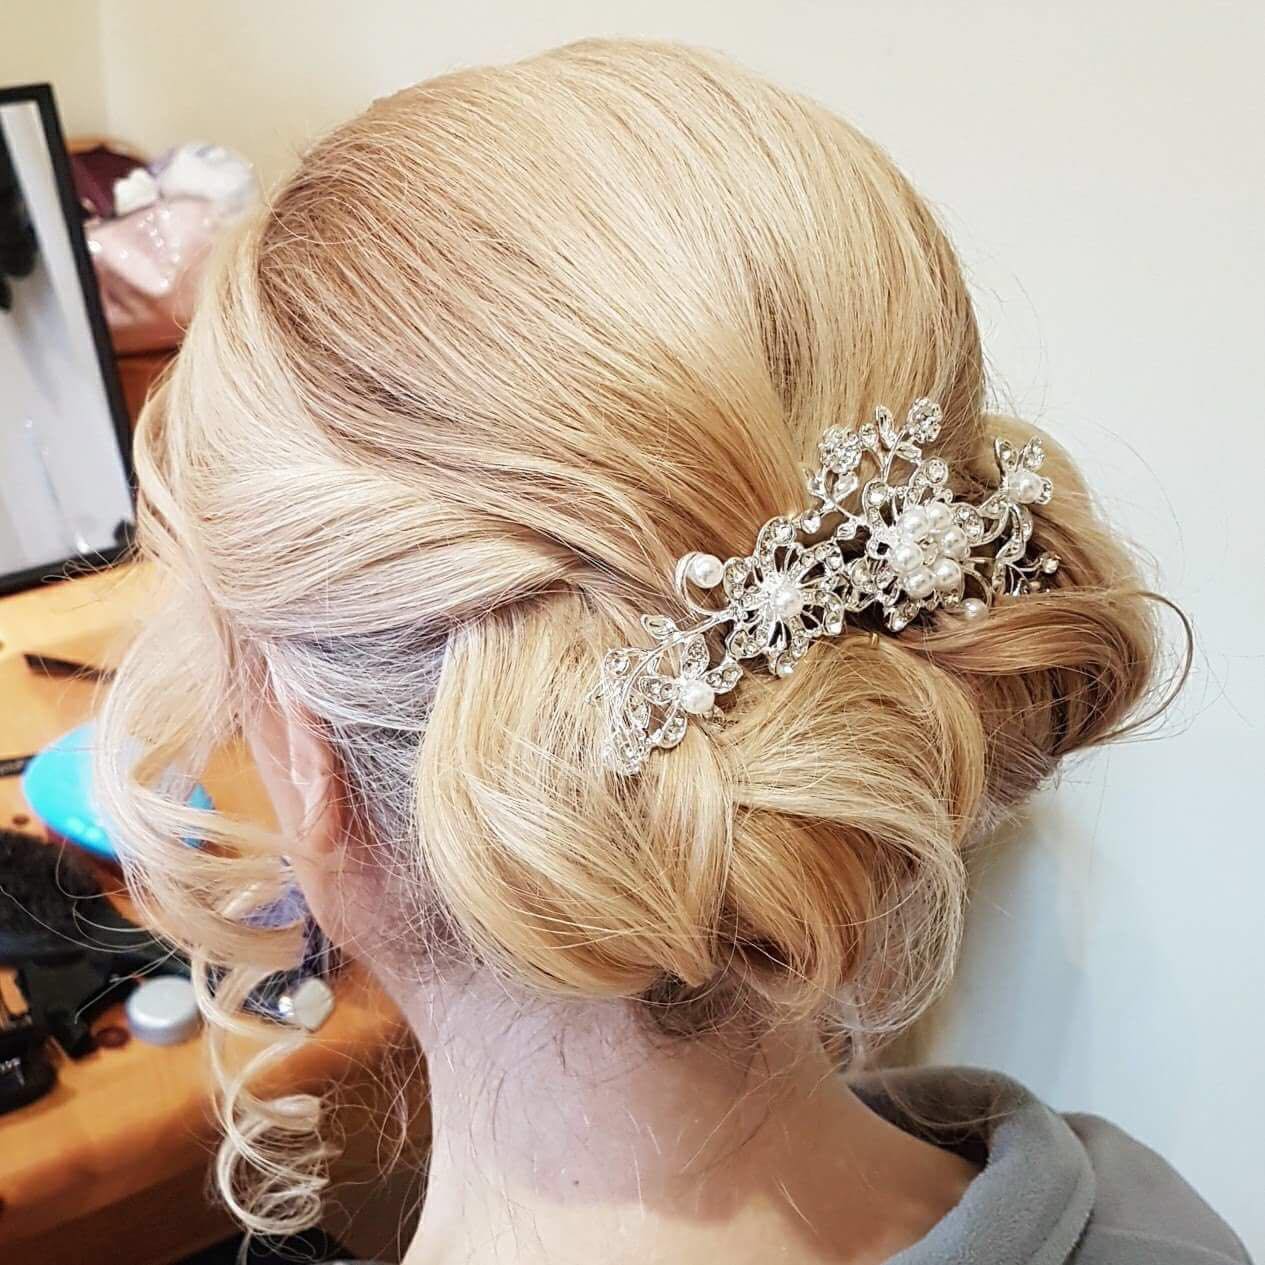 Team of Bridal Hair and Makeup Artists covering Surrey, Berkshire and Hampshire